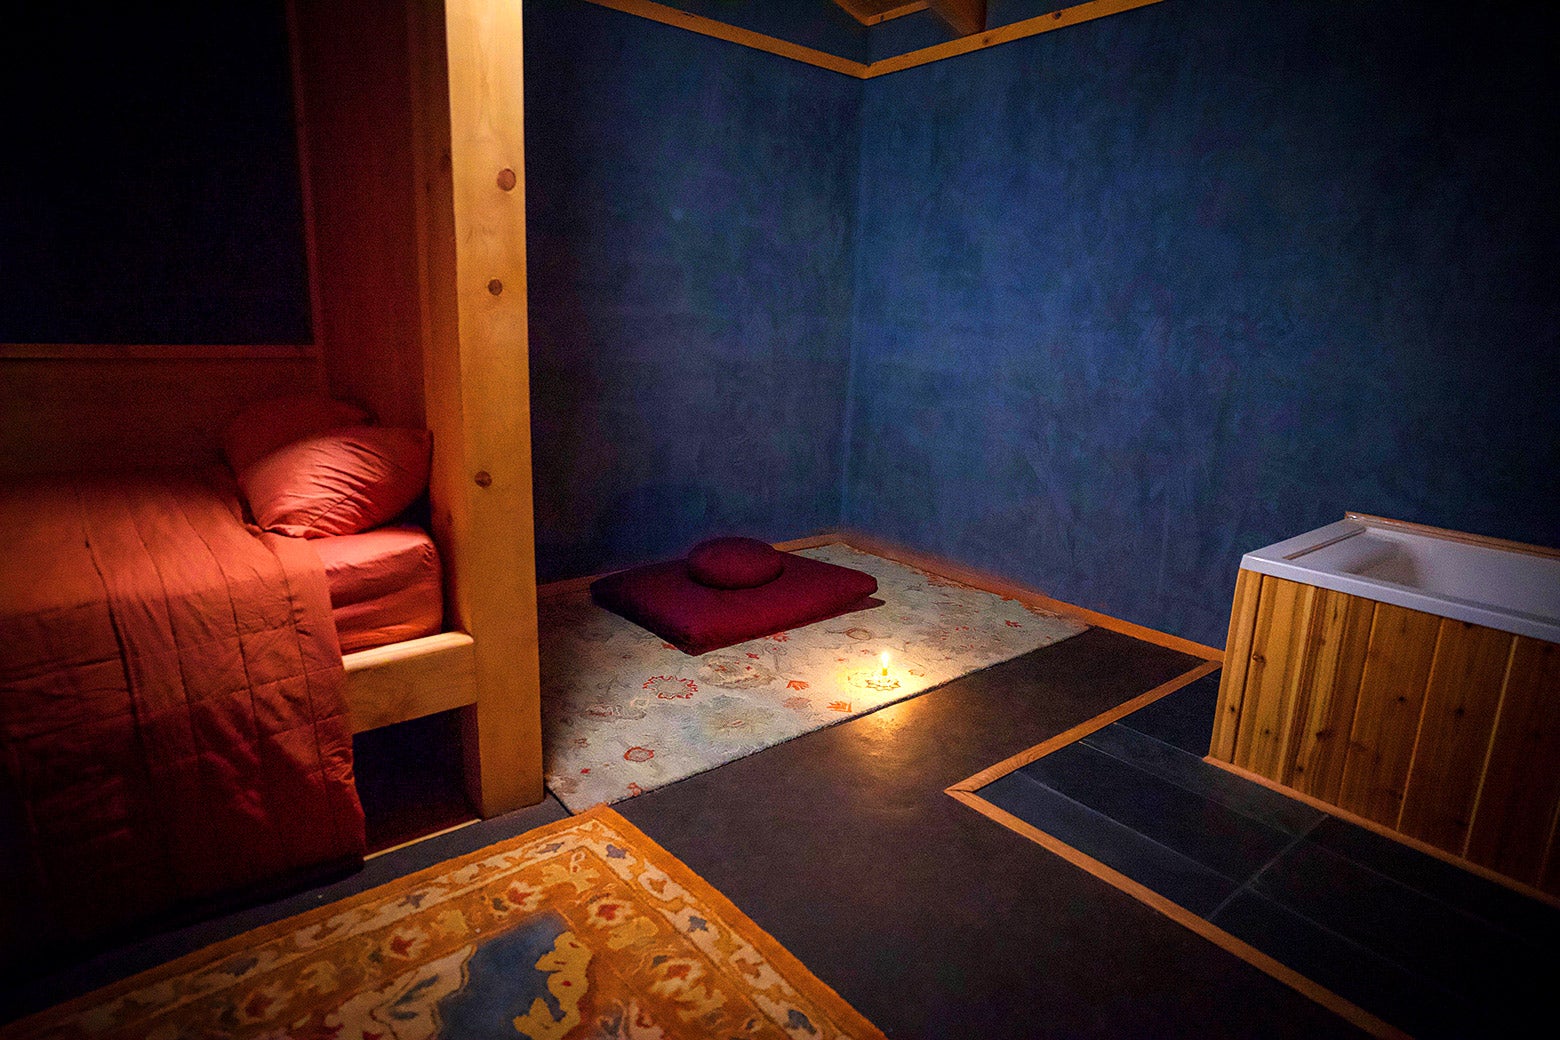 A bed, rug, bathtub, and meditation pillow in a blue-painted room are lit by what appears to be a single candle on the floor by the pillow.